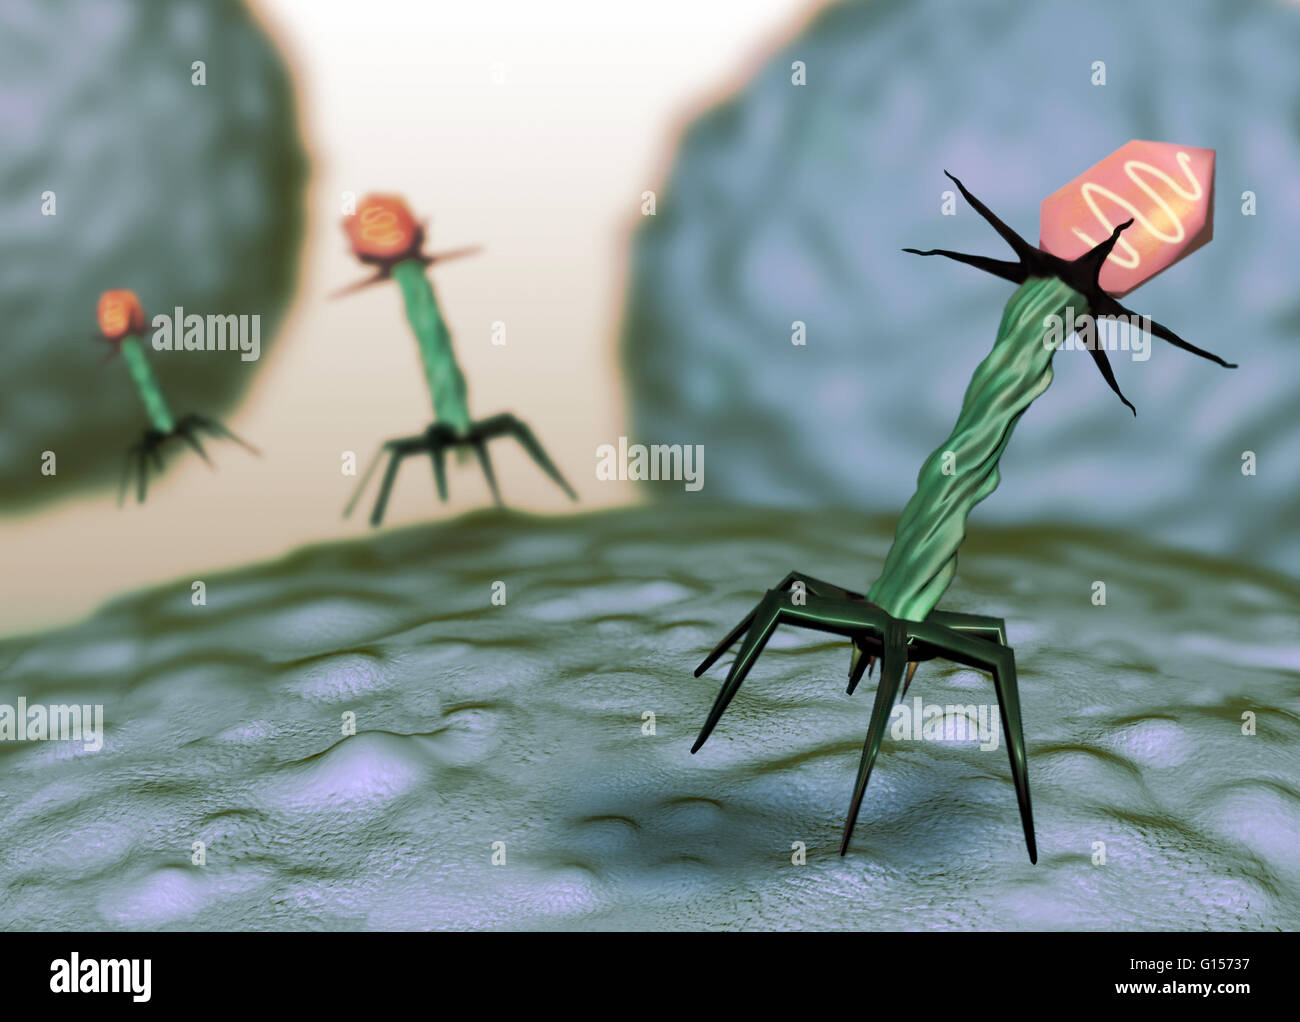 T4 bacteriophage. Computer artwork of a T4 bacteriophage virus. The swollen structure at top is the head, which contains DNA inside a protein coat. Attached to this is the tail, consisting of a tube-like sheath and tail fibers (at bottom). T4 bacteriophag Stock Photo